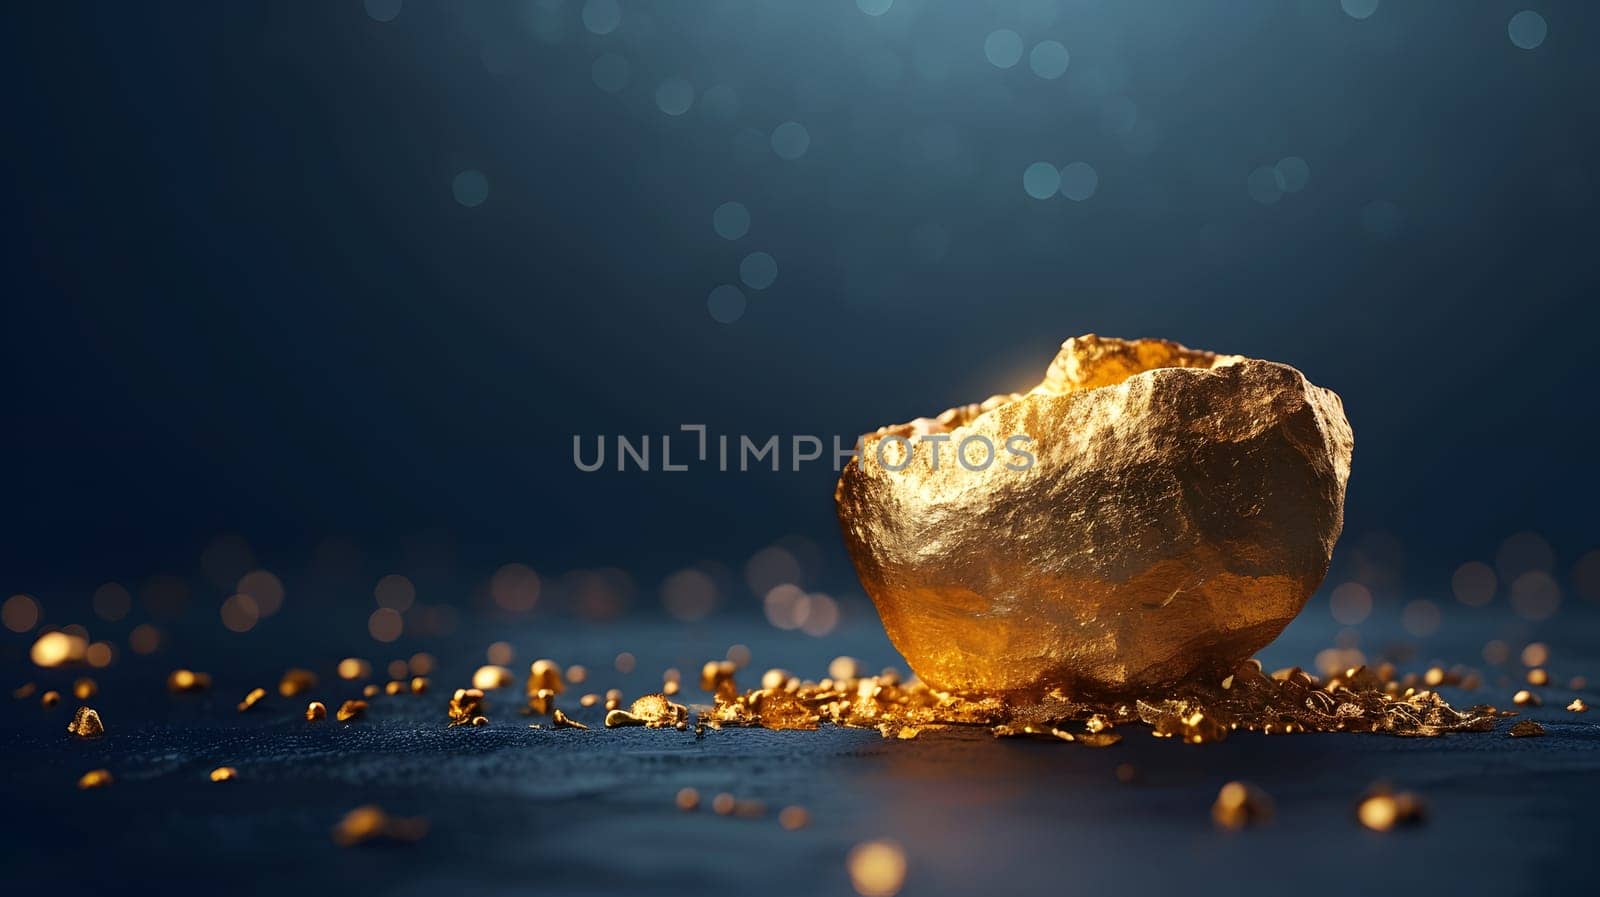 A golden nugget rests on a table, shimmering in the light, with gold dust scattered around. The scene evokes a sense of luxury and opulence